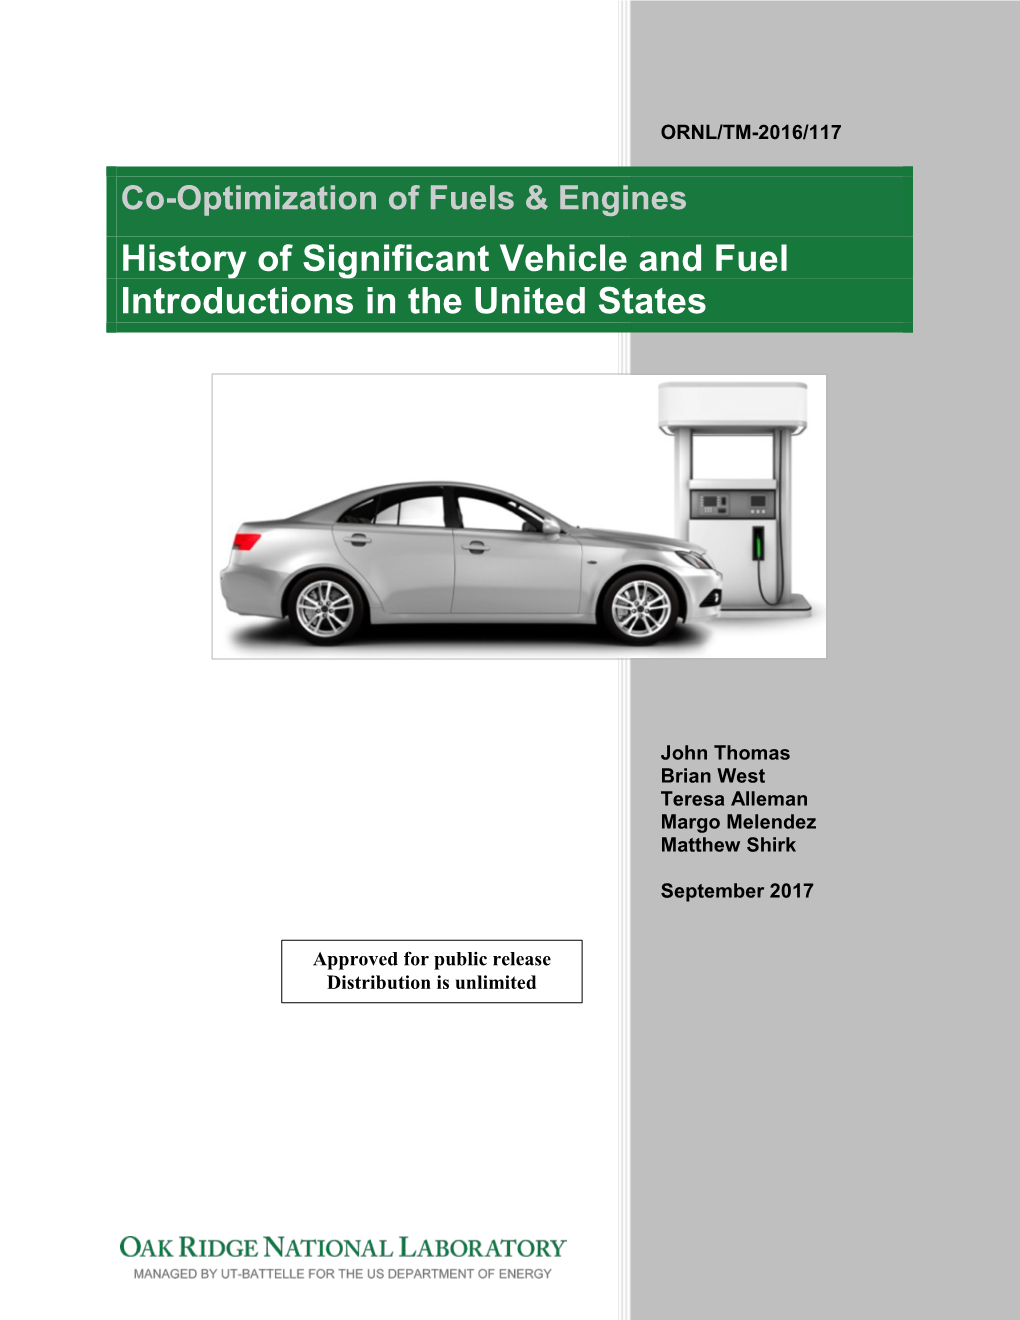 History of Significant Vehicle and Fuel Introductions in the United States